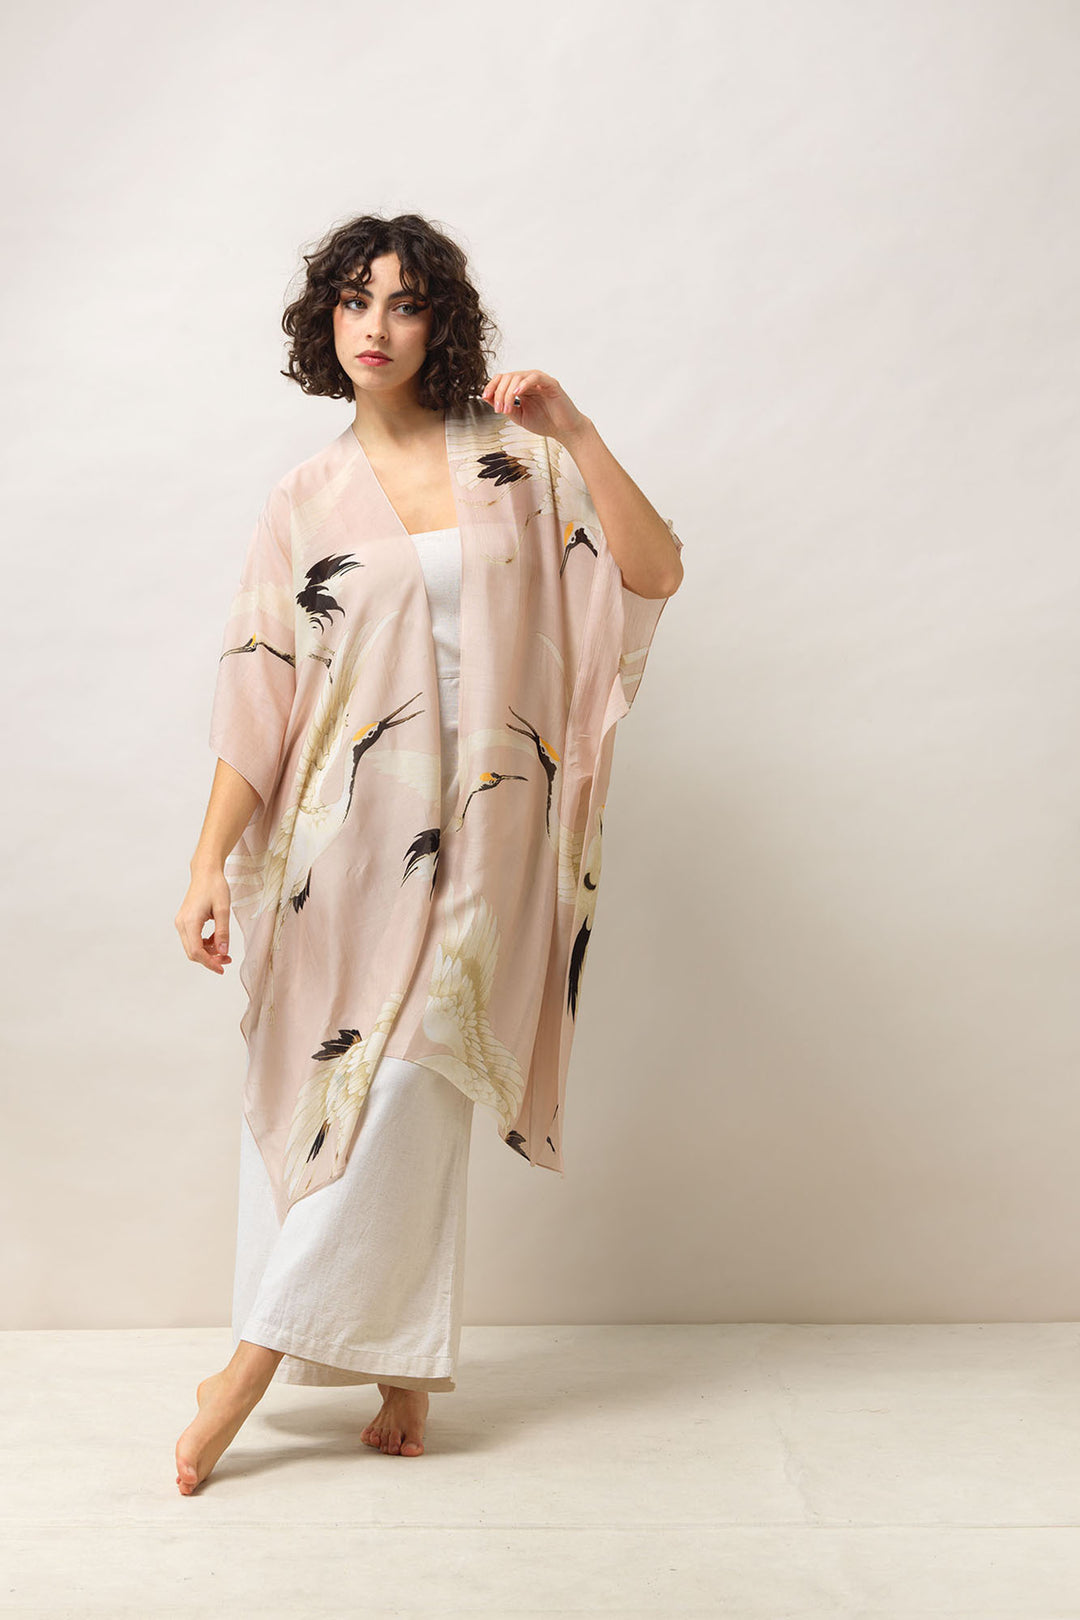 Women's lightweight throwover shawl in plaster pink and white stork print by One Hundred Stars